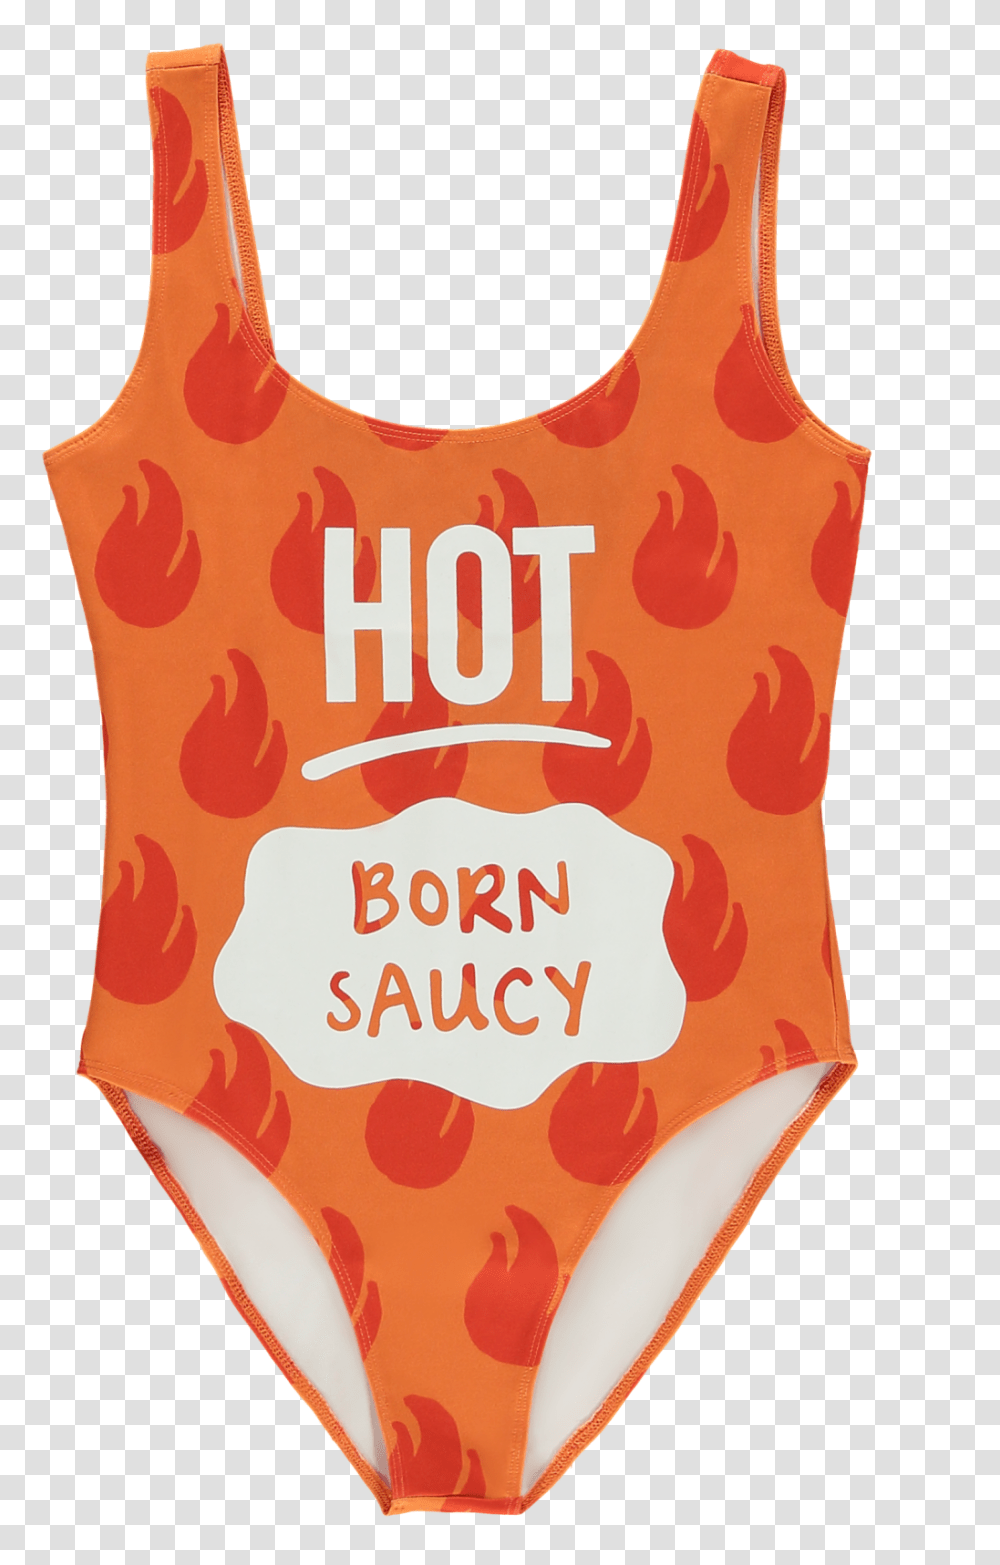 Photos This Is What A Taco Bell Fashion Line Looks Like Taco Bell Bathing Suit, Bib, Clothing, Apparel Transparent Png